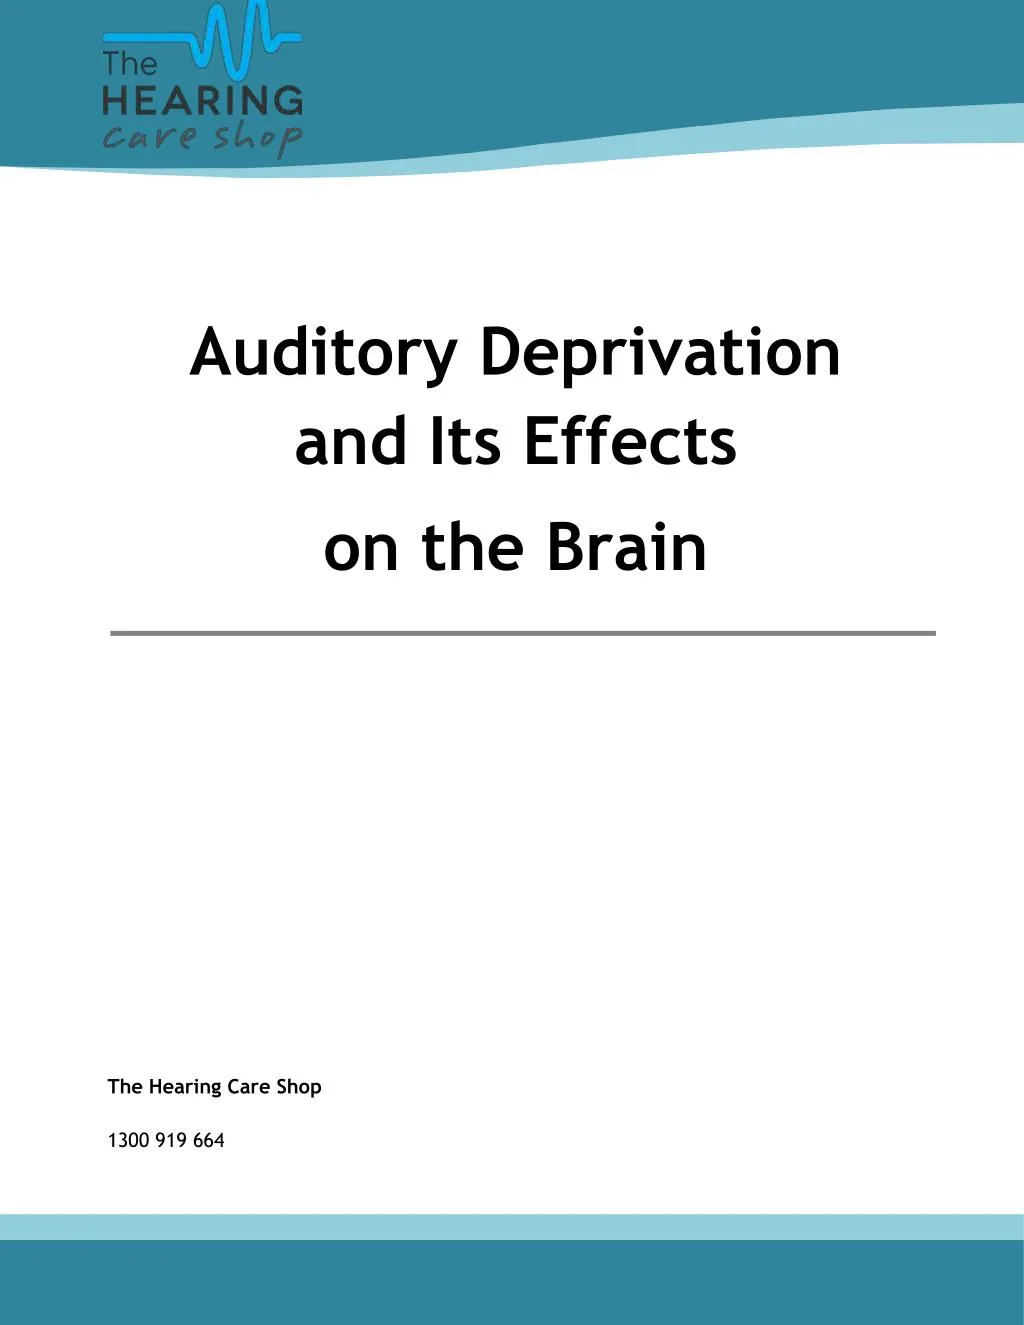 Ppt Auditory Deprivation And Its Effects On The Brain Powerpoint